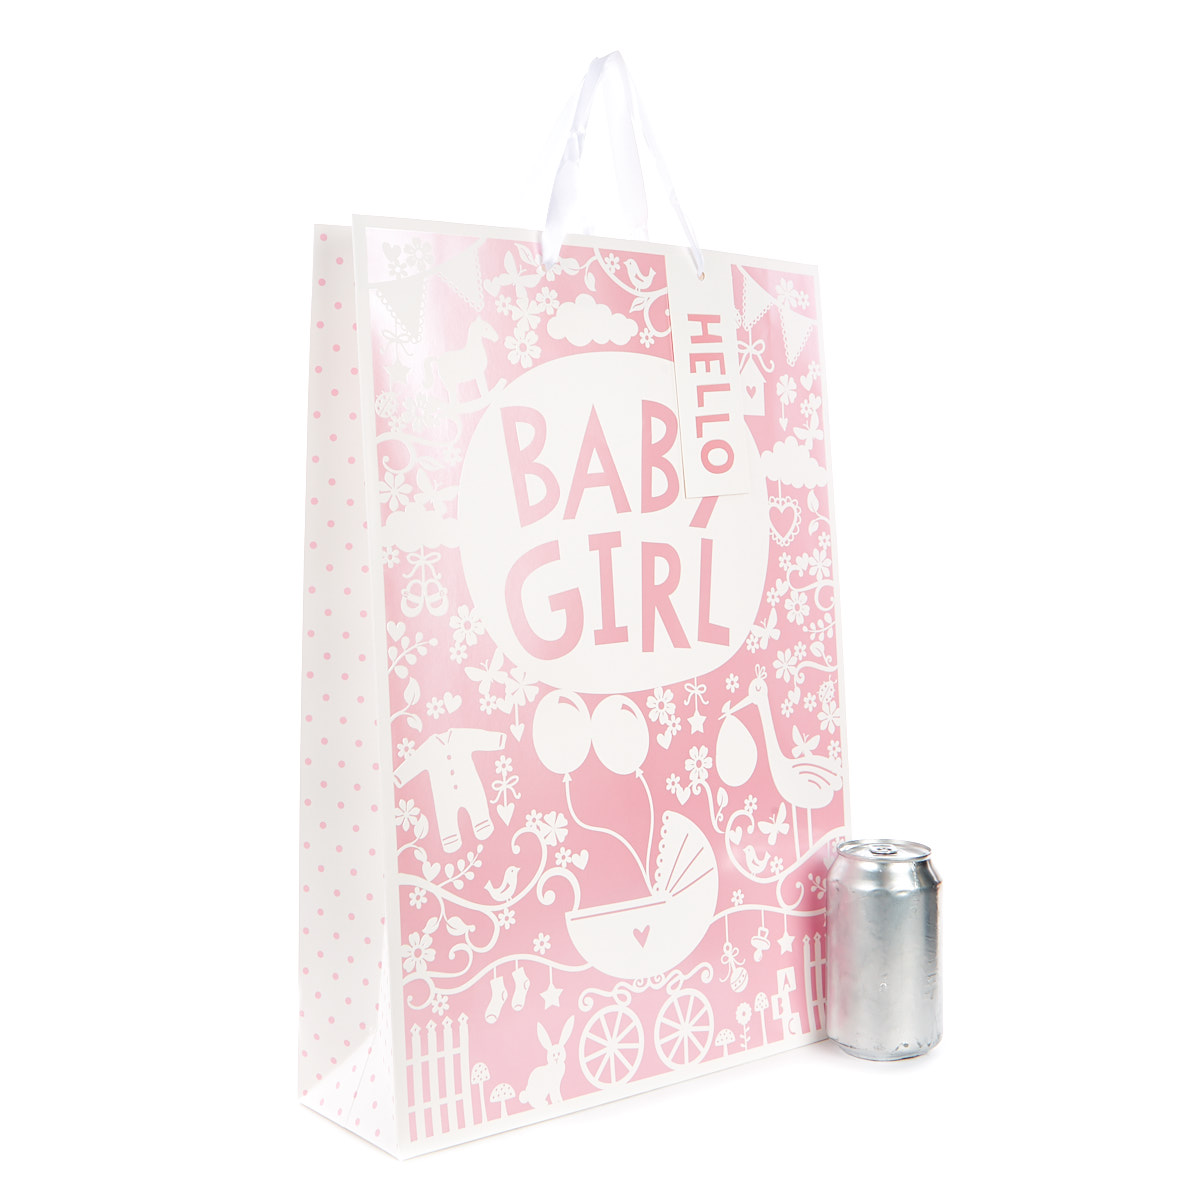 Extra Large Portrait Pink And White Baby Girl Gift Bag